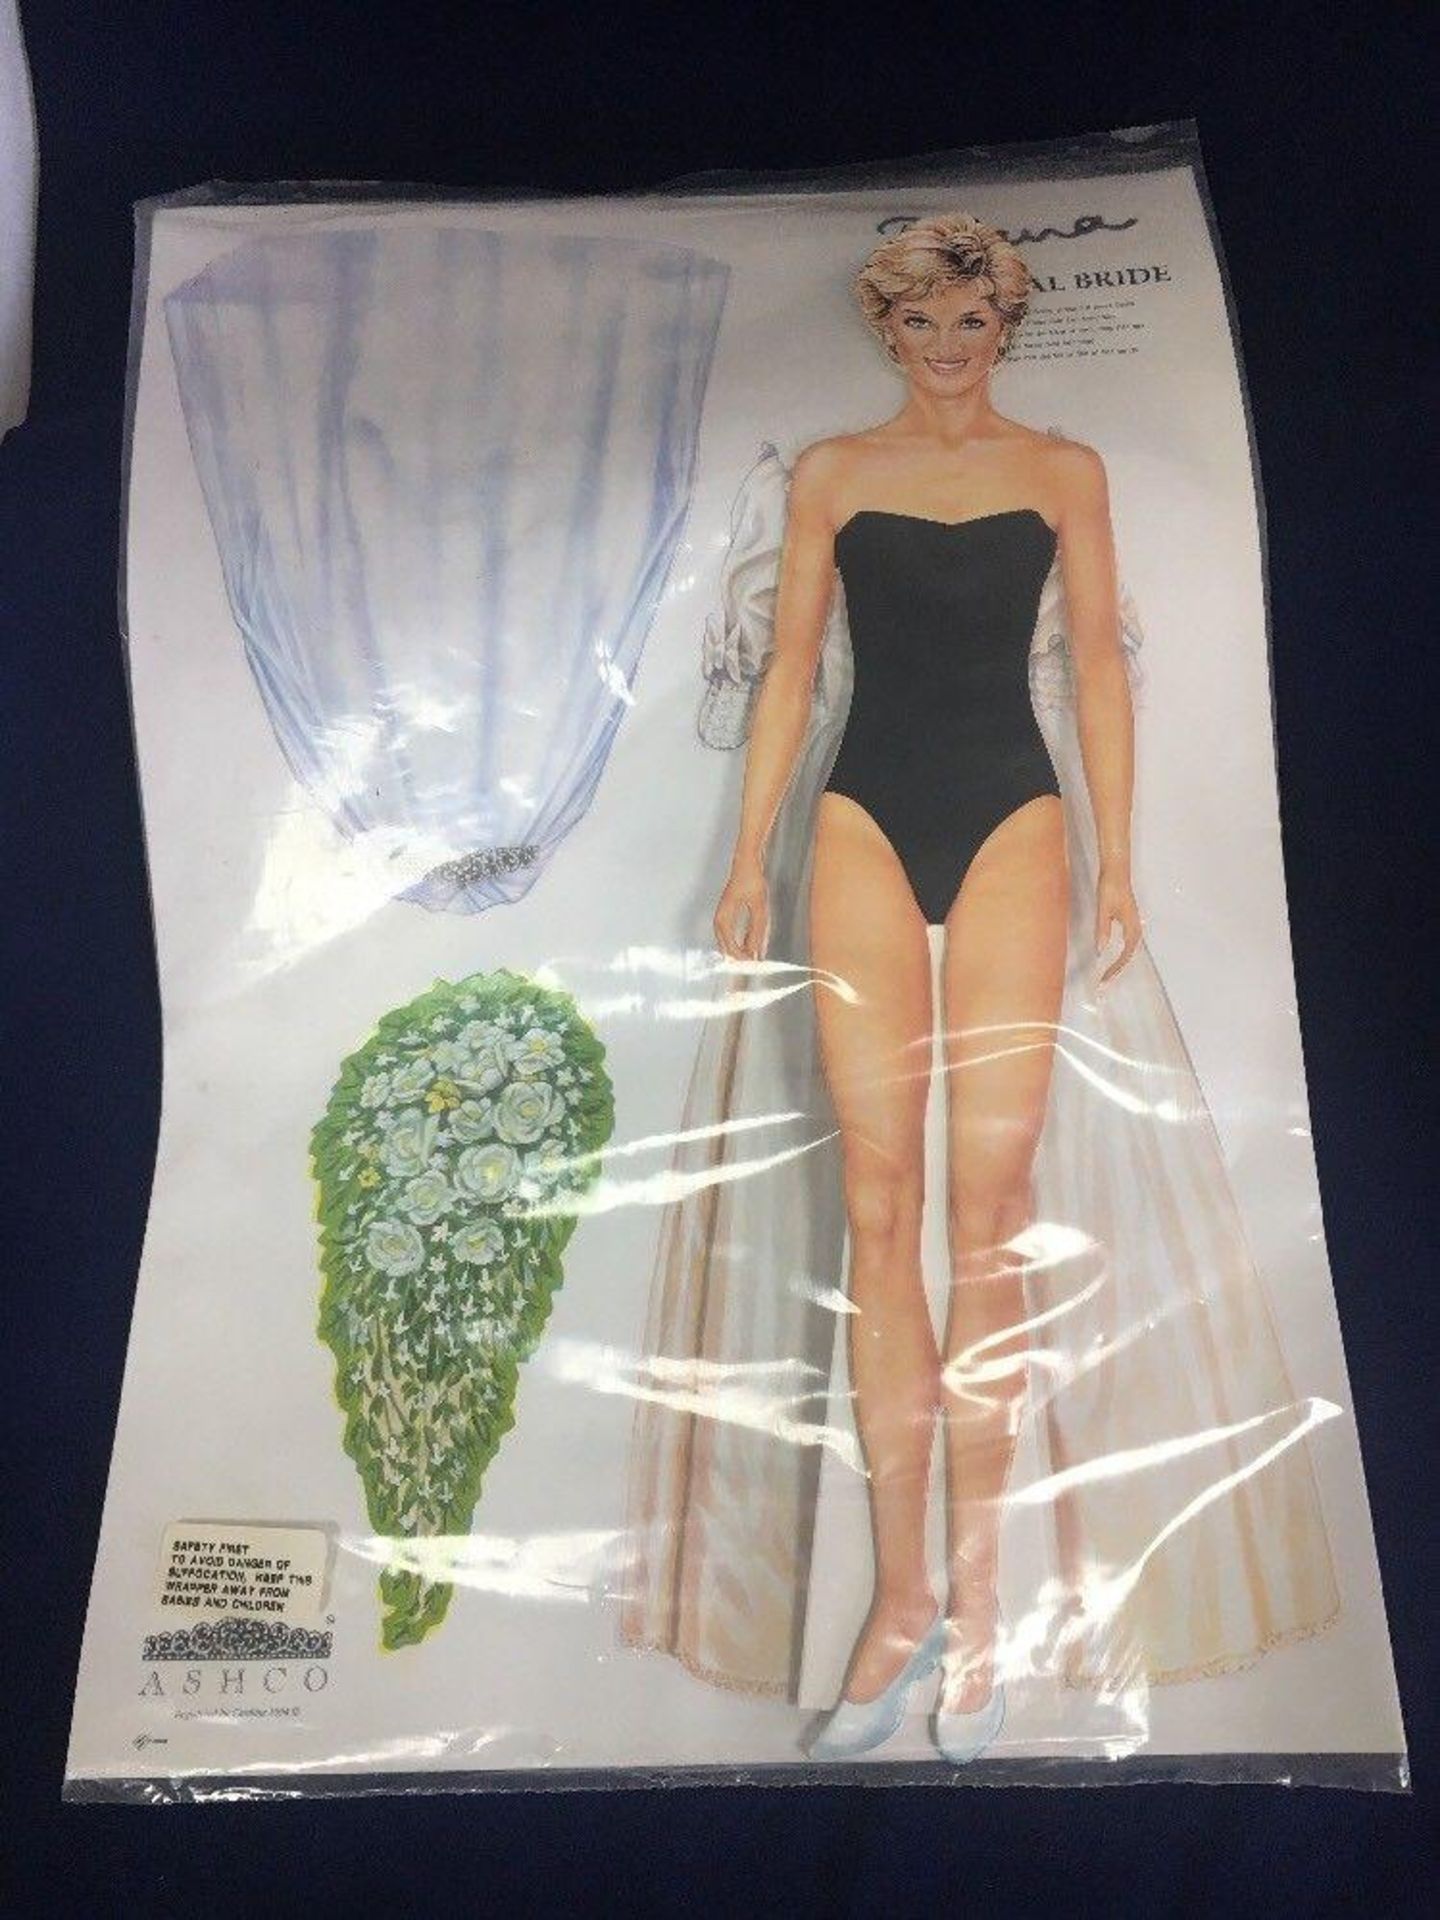 Sealed 1990s Princess Diana The Royal Bride Cardboard Dress Up Cut Out 6 Costume - Image 3 of 3